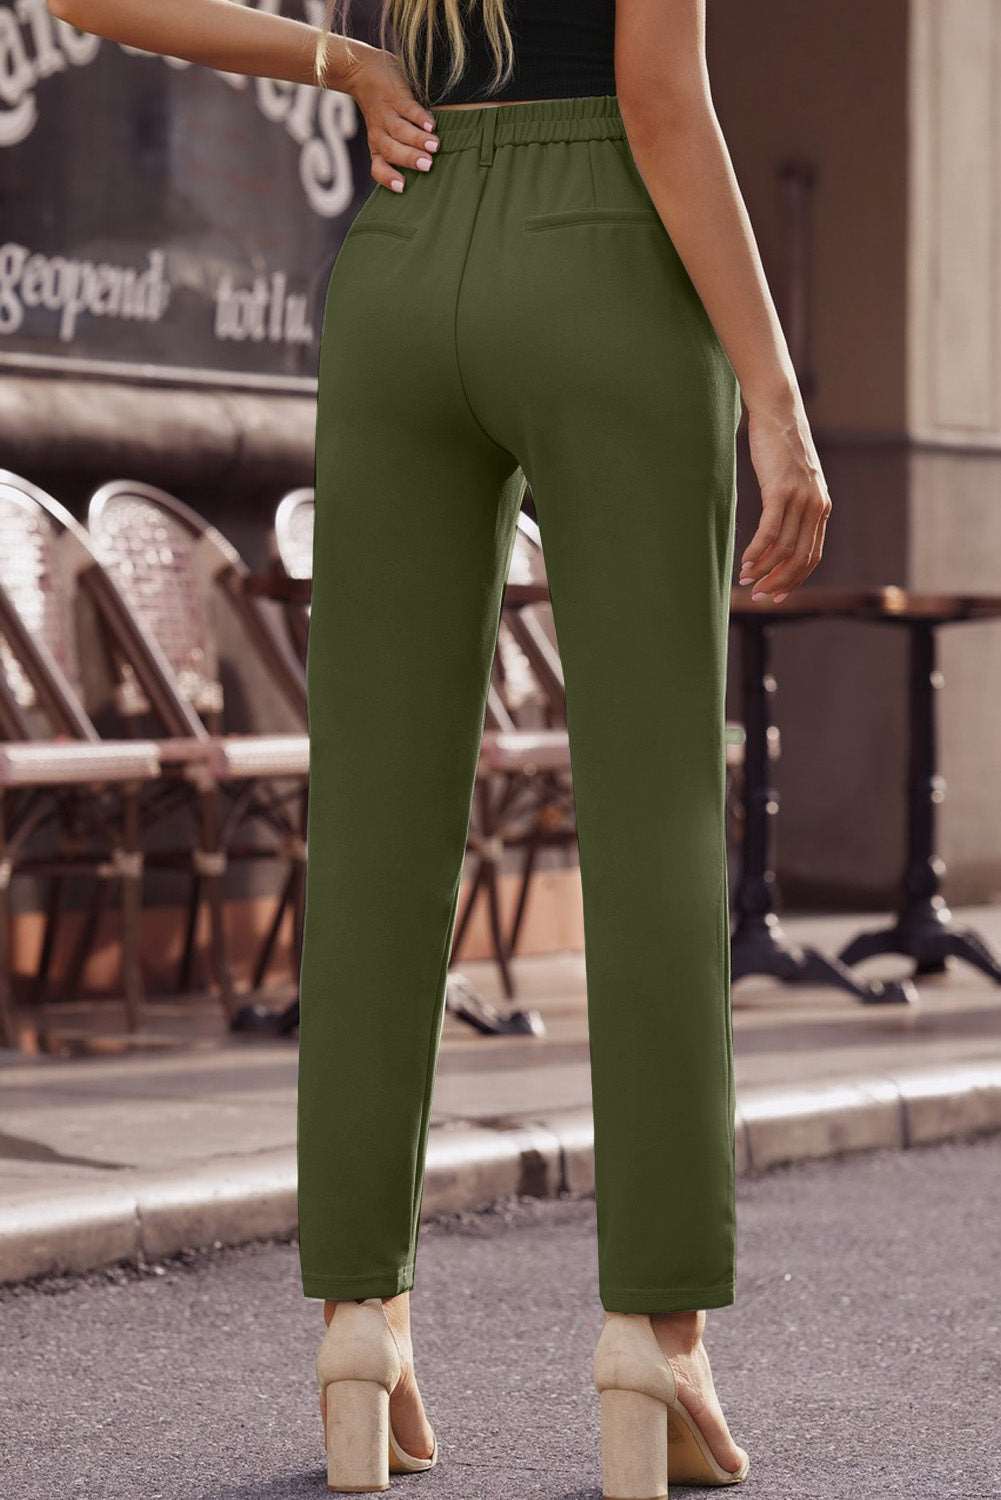 Ankle-Length Straight Leg Pants with Pockets apparel & accessories